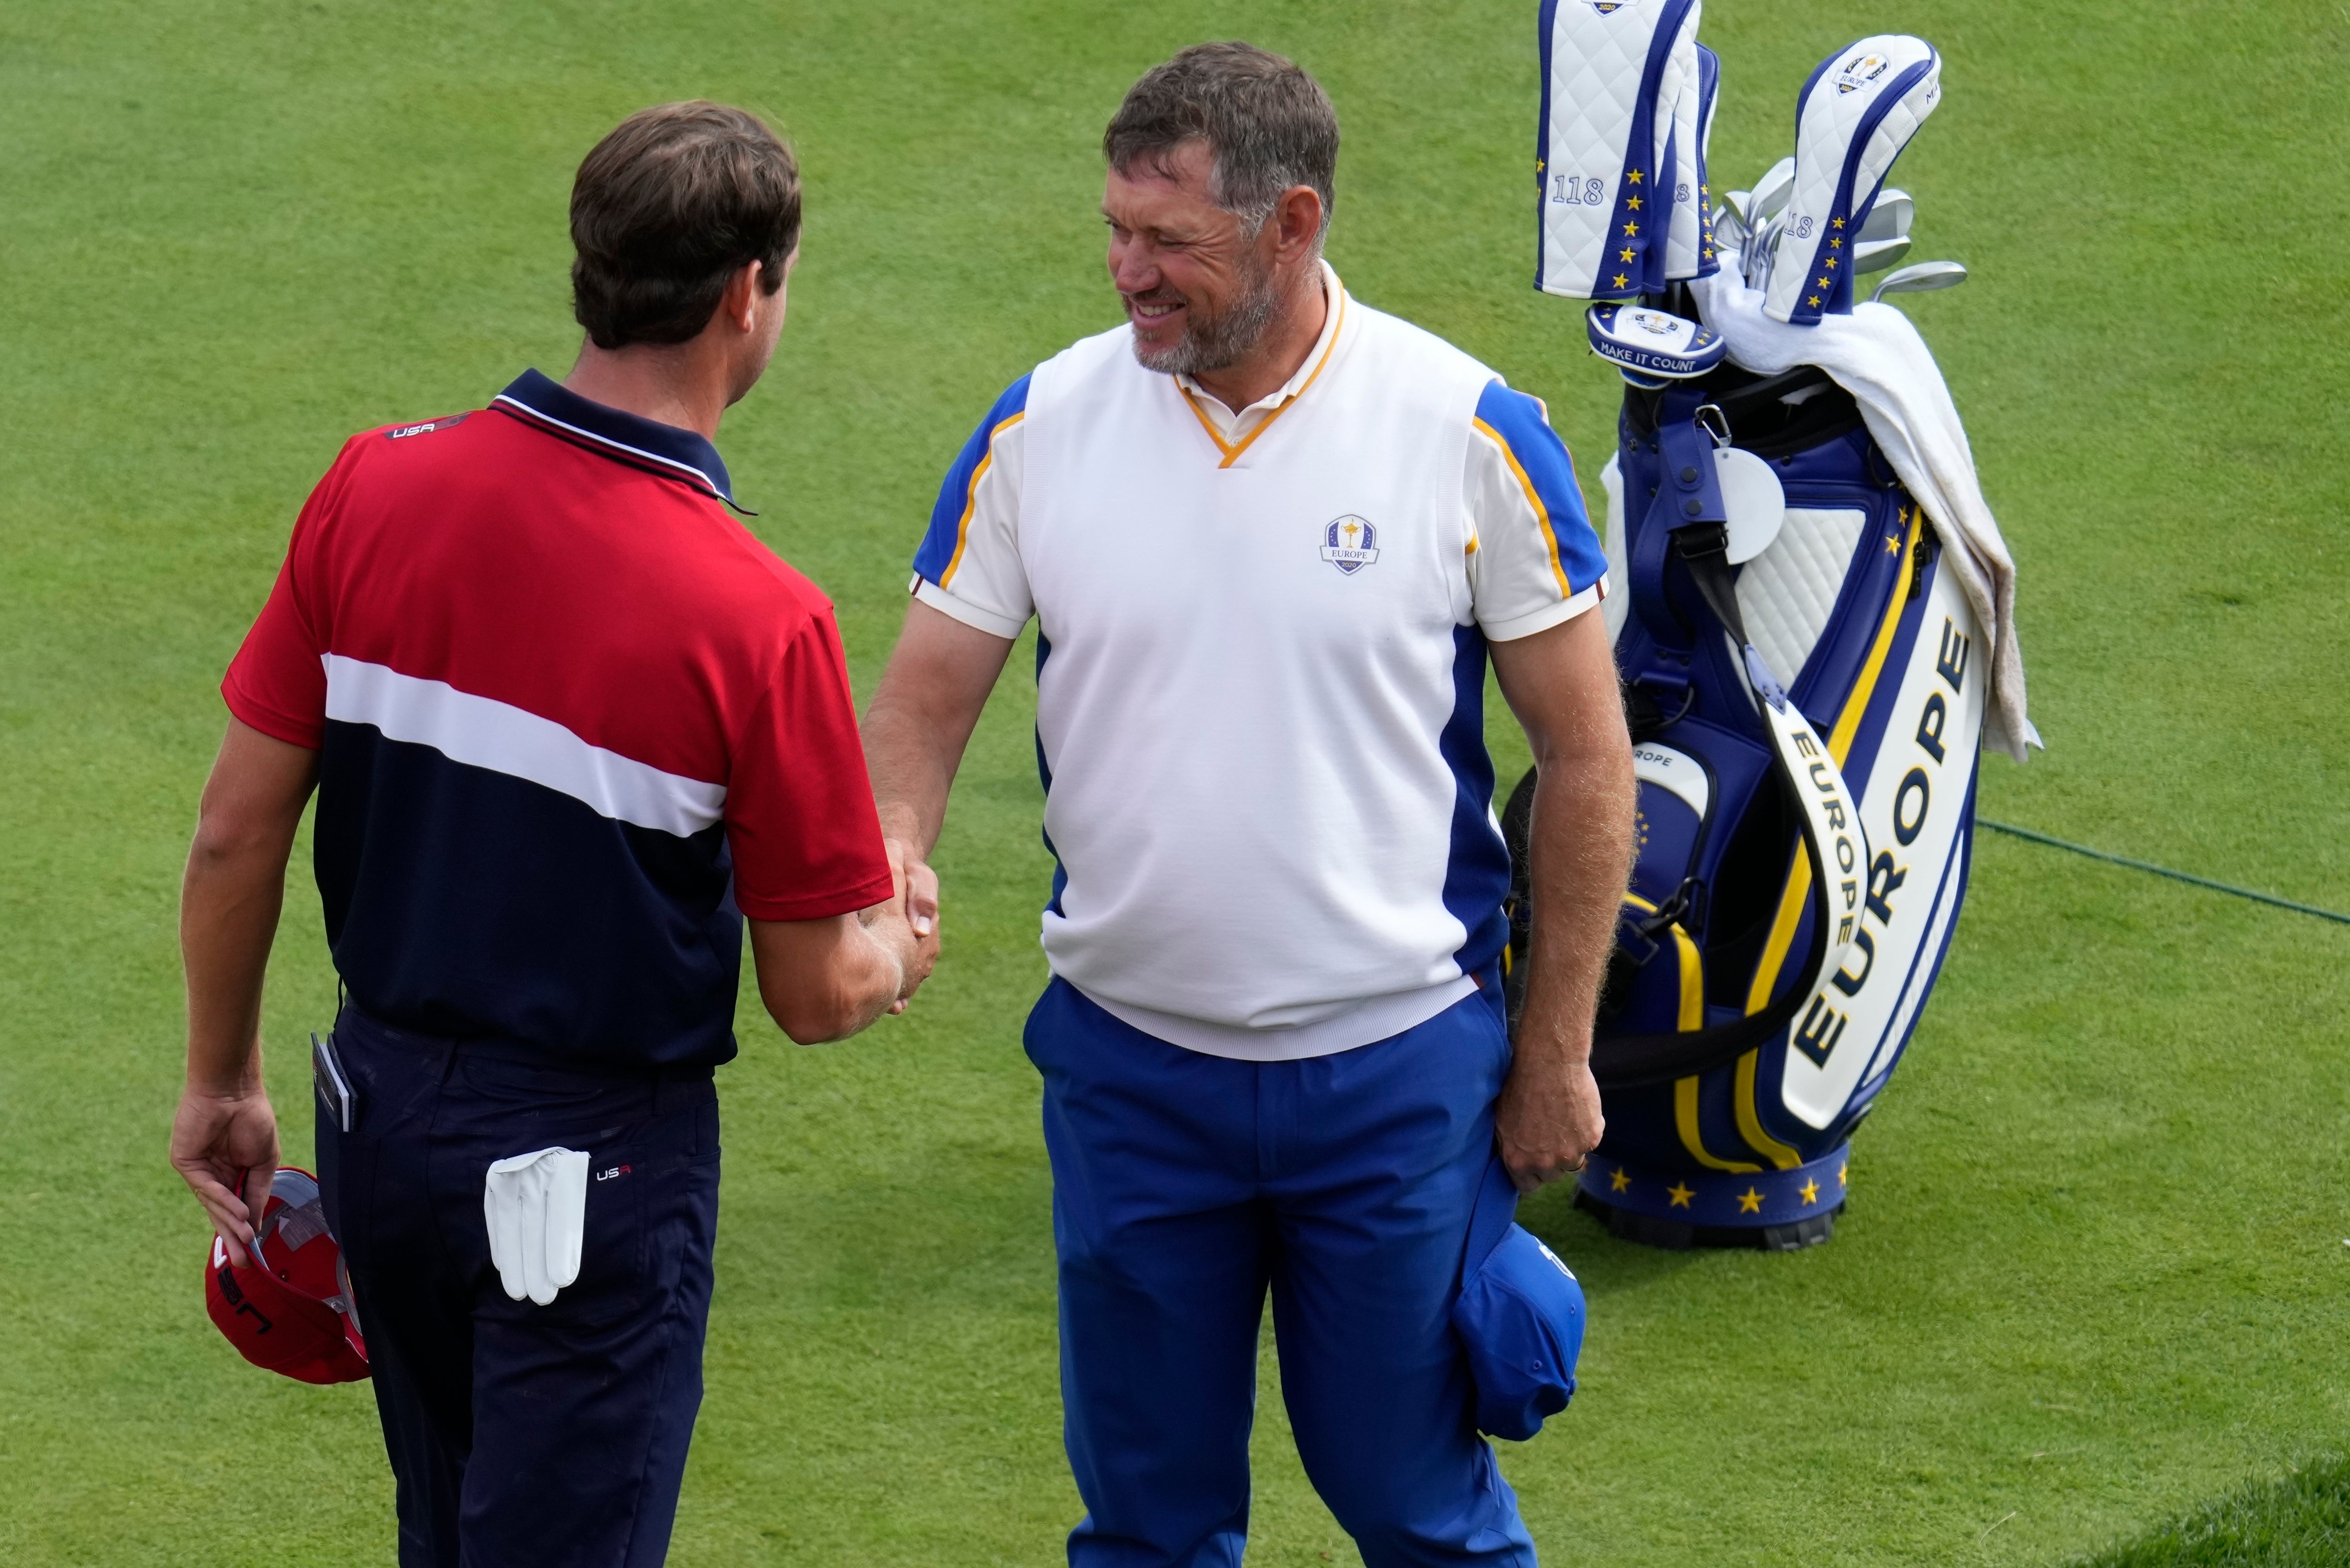 Lee Westwood shakes hands with Harris English after their singles match in the Ryder Cup (Ashley Landis/AP)